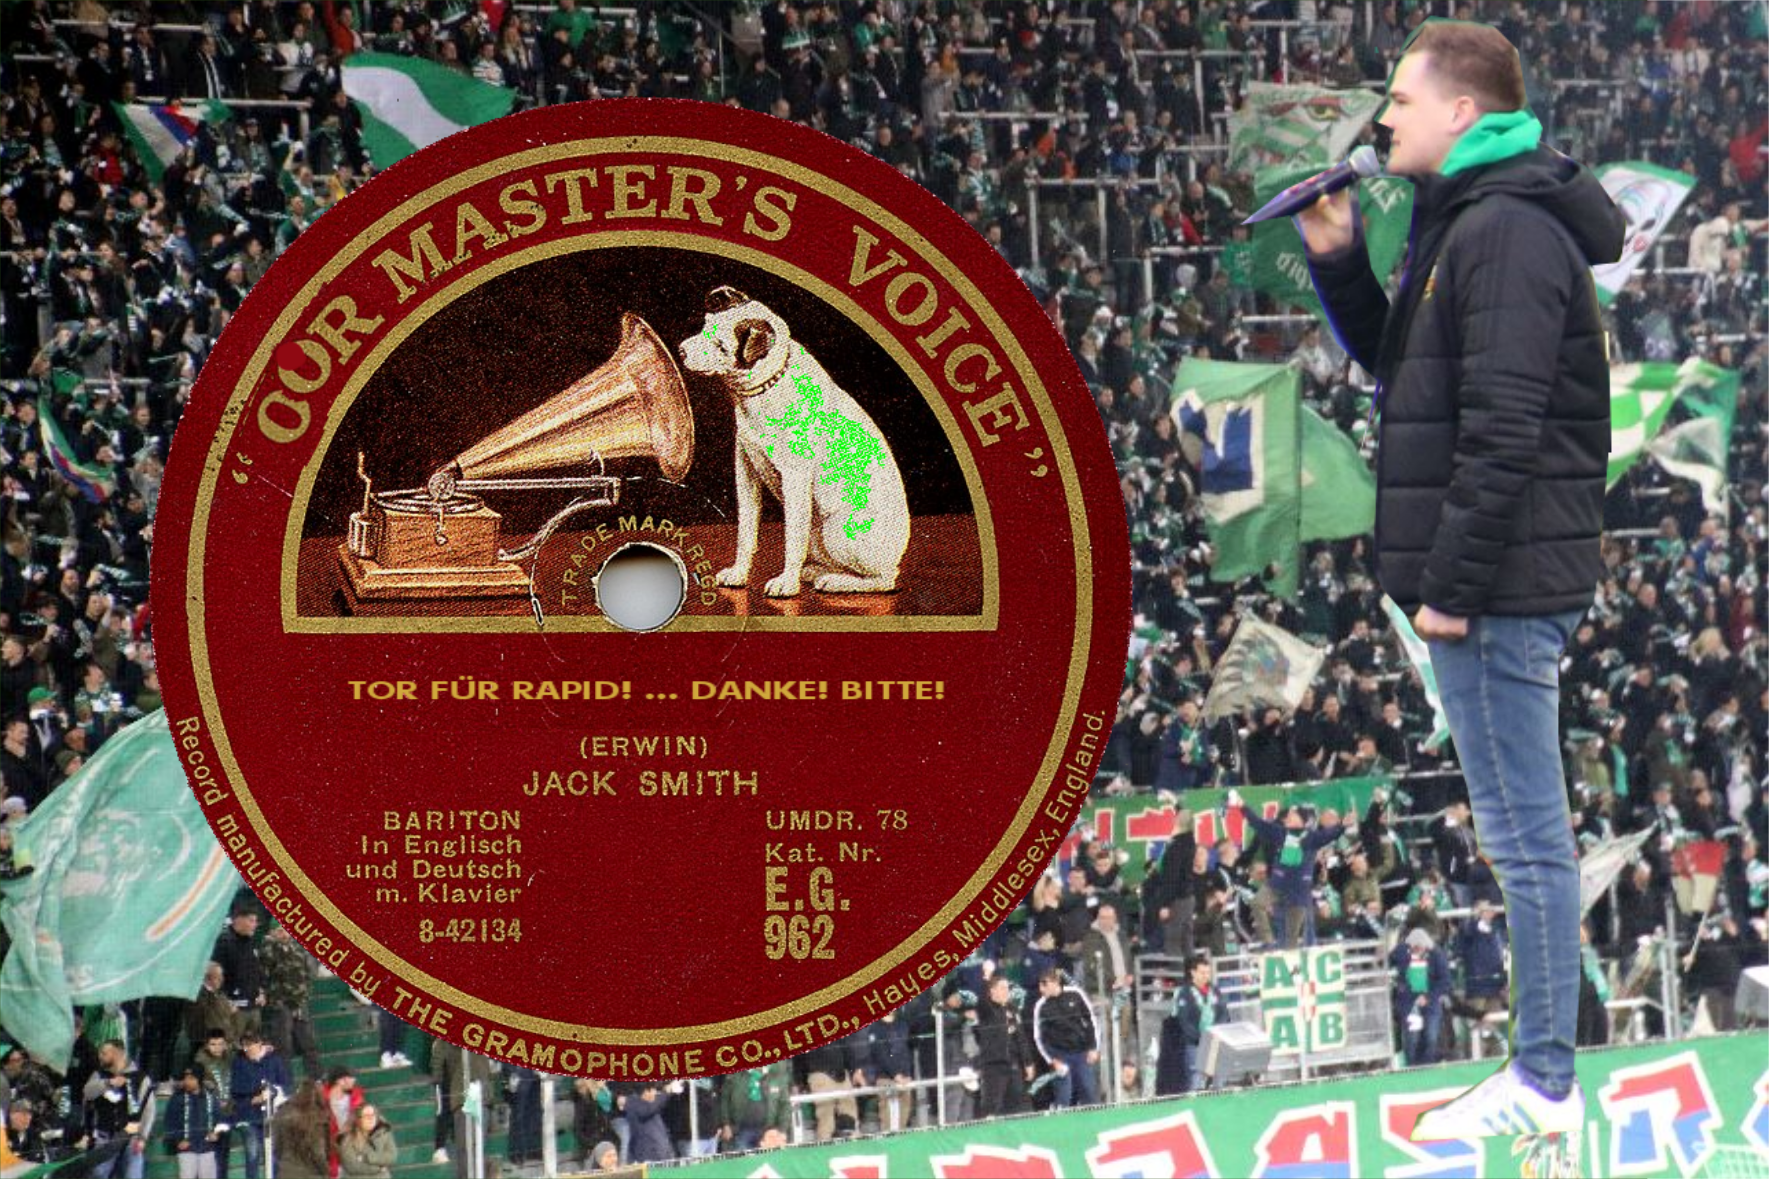 Our Master’s Voice